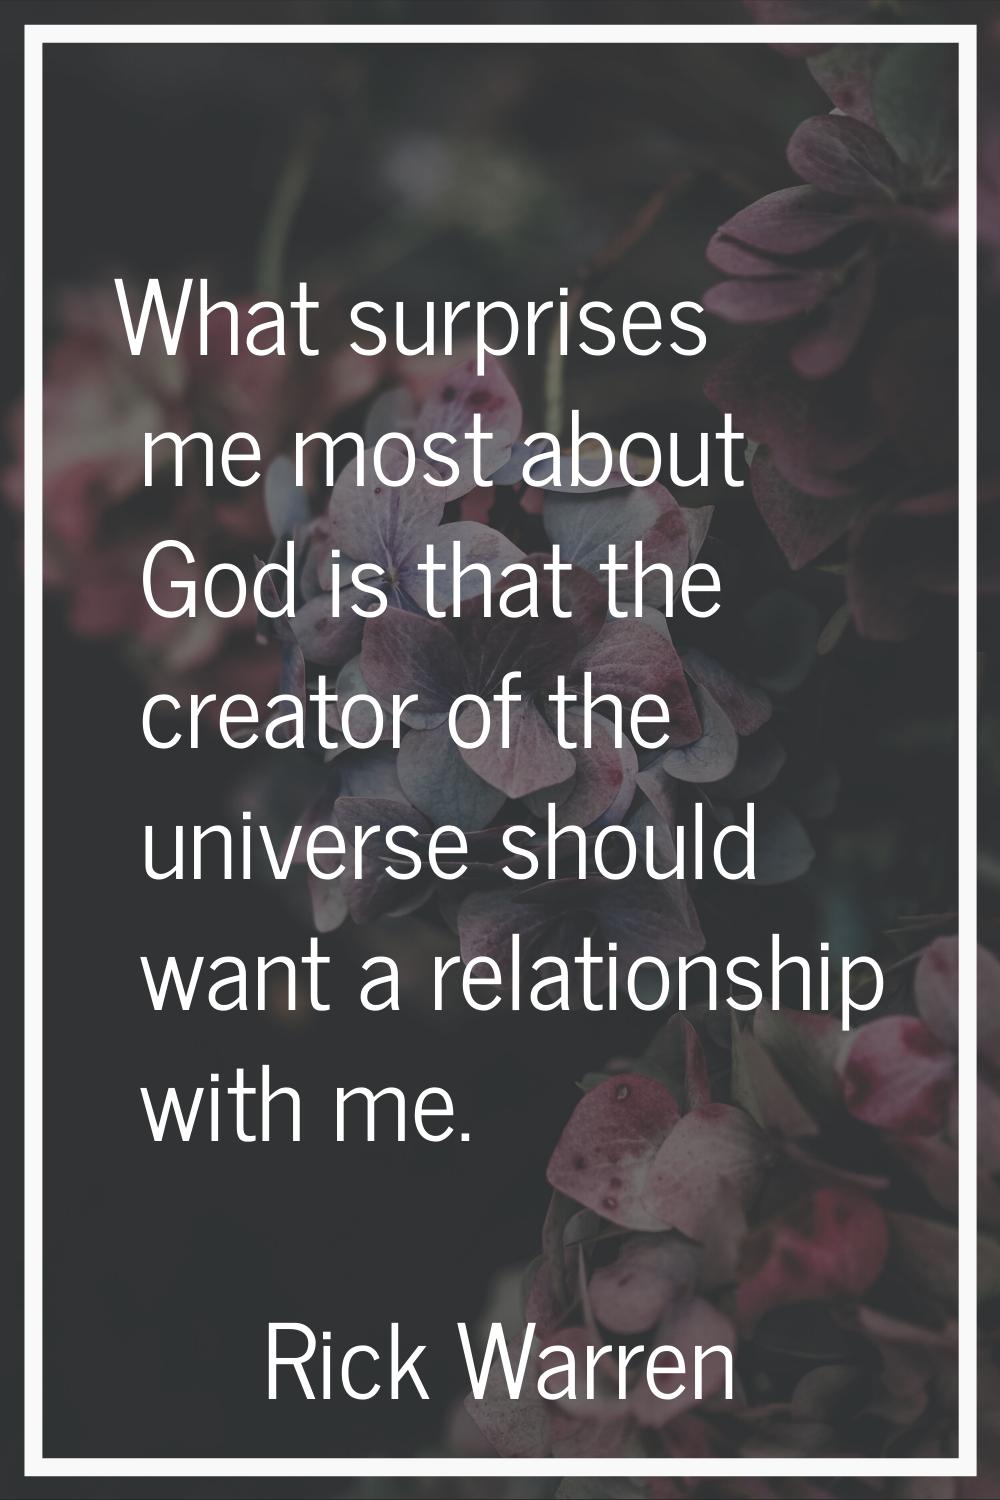 What surprises me most about God is that the creator of the universe should want a relationship wit